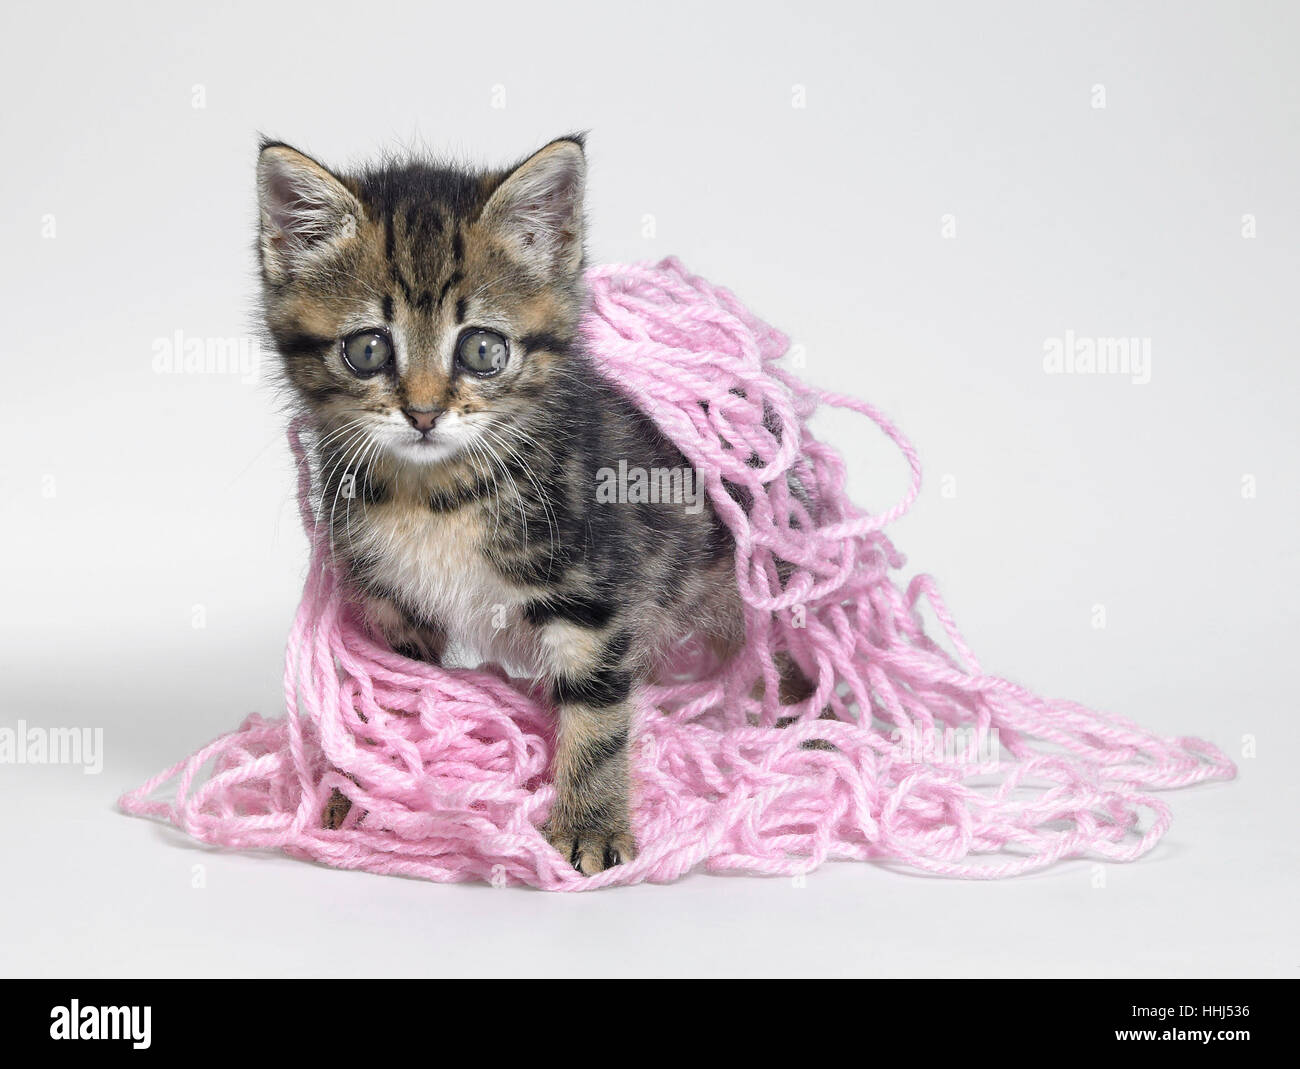 Studio photography of a kitten playing and coated with pink wool Stock Photo